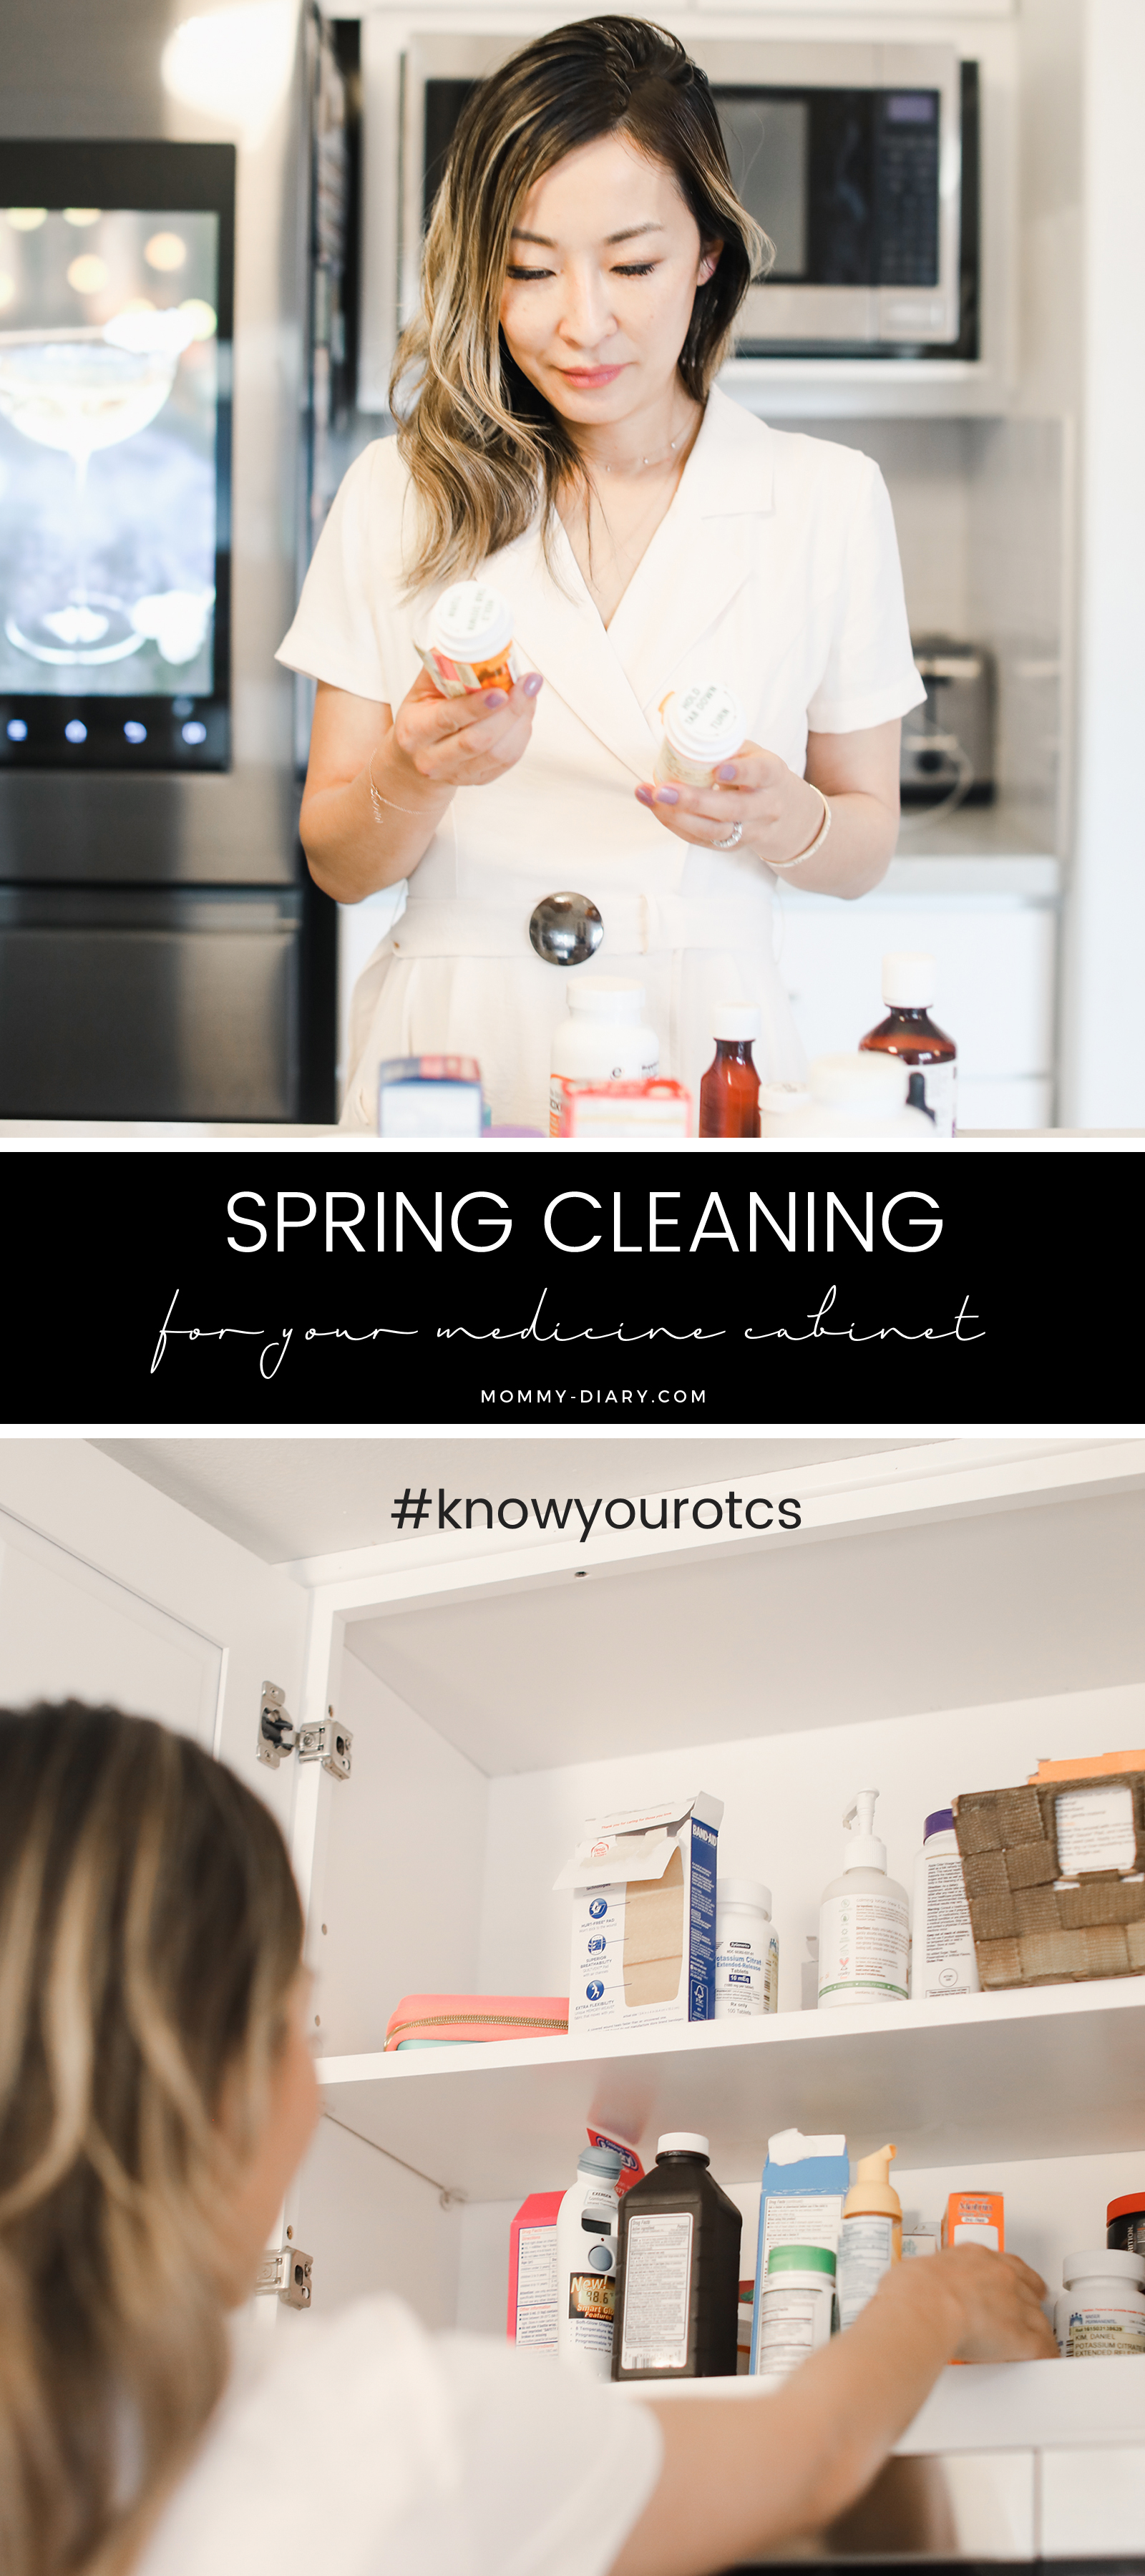 spring-cleaning-know-your-otcs-pinterest